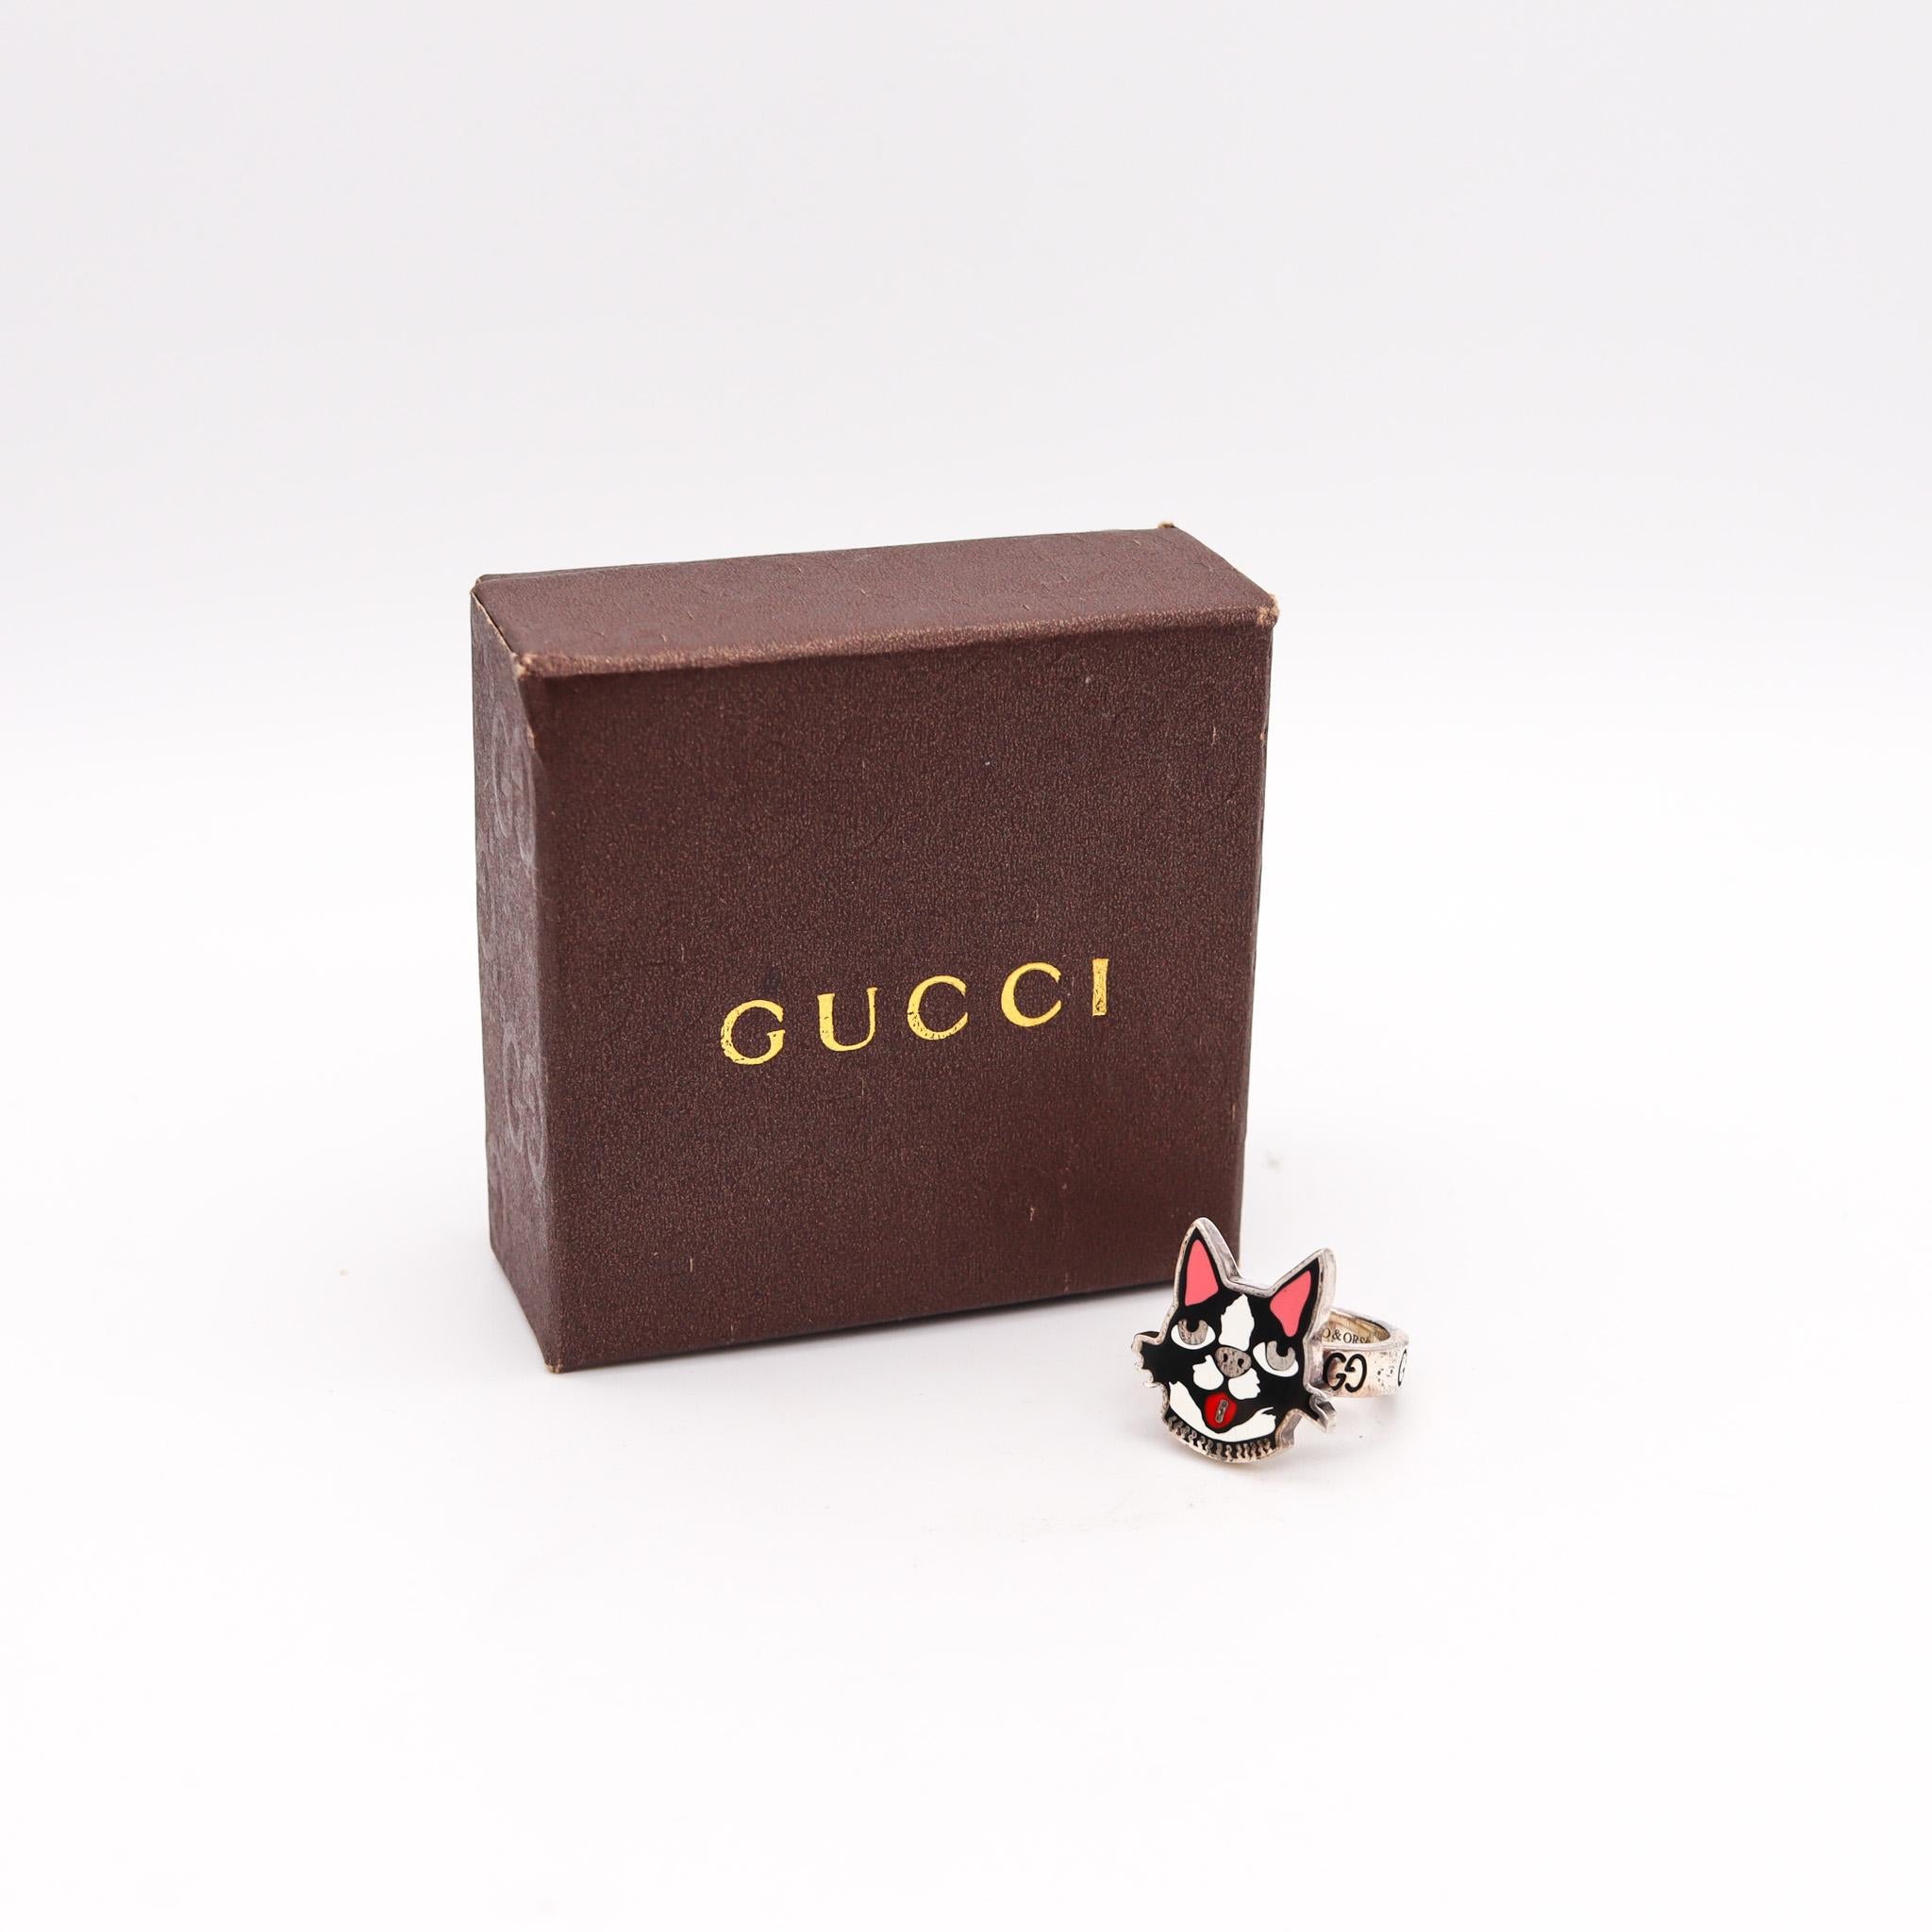 Enamelled ring designed by Gucci.

Beautiful vintage ring, created in milano Italy by the luxury house of Gucci. This cocktail ring is part of the collection of 2018 Chinese New Year; Bosco & Orso series and has been crafted in the shape of a dog in